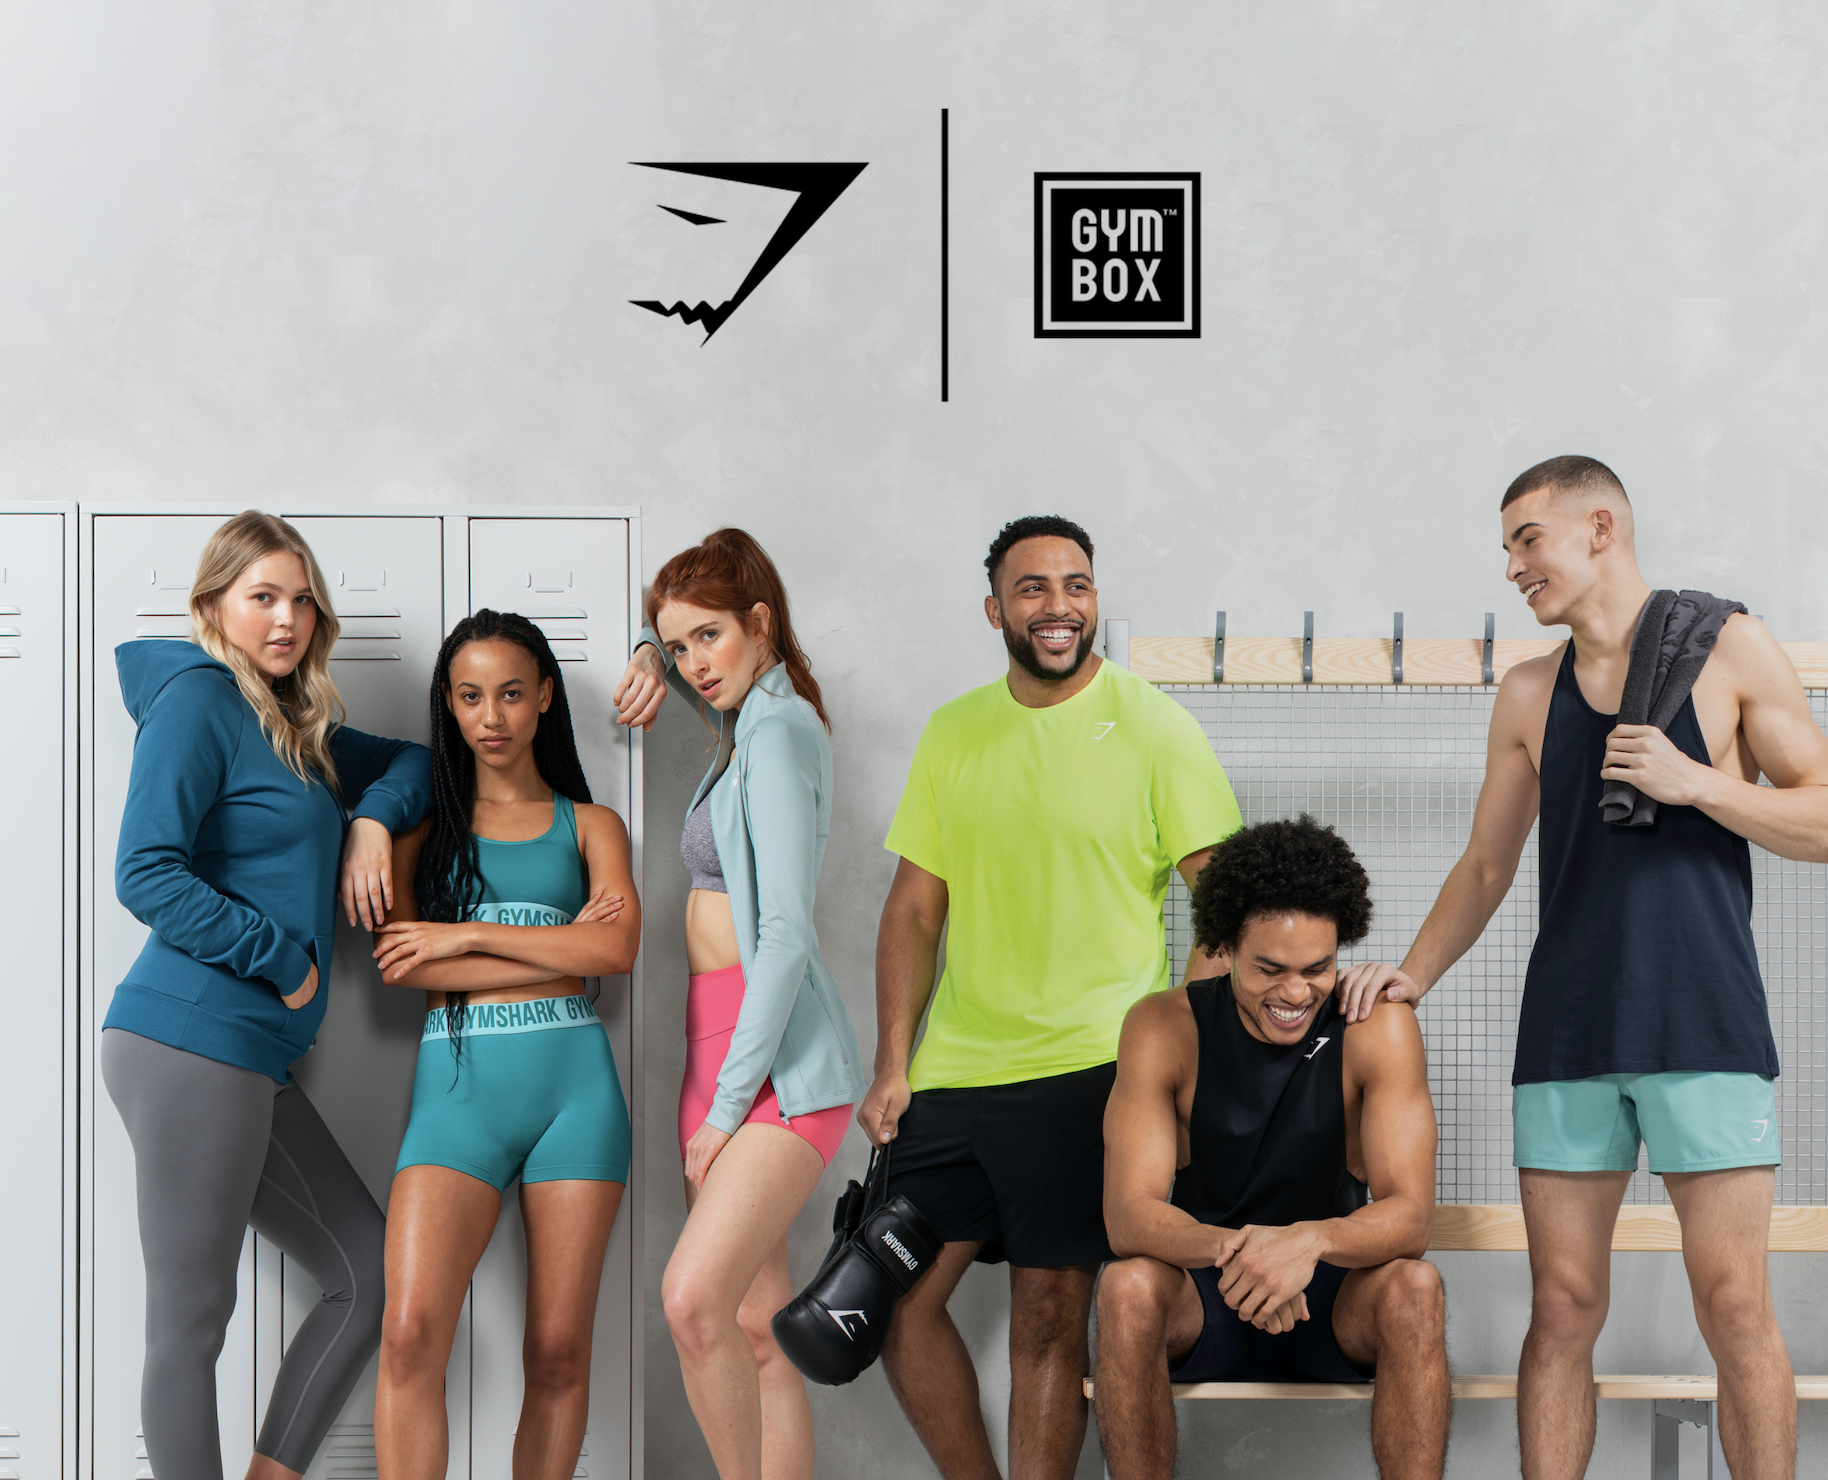 Inside Gymshark's London store, opening this weekend